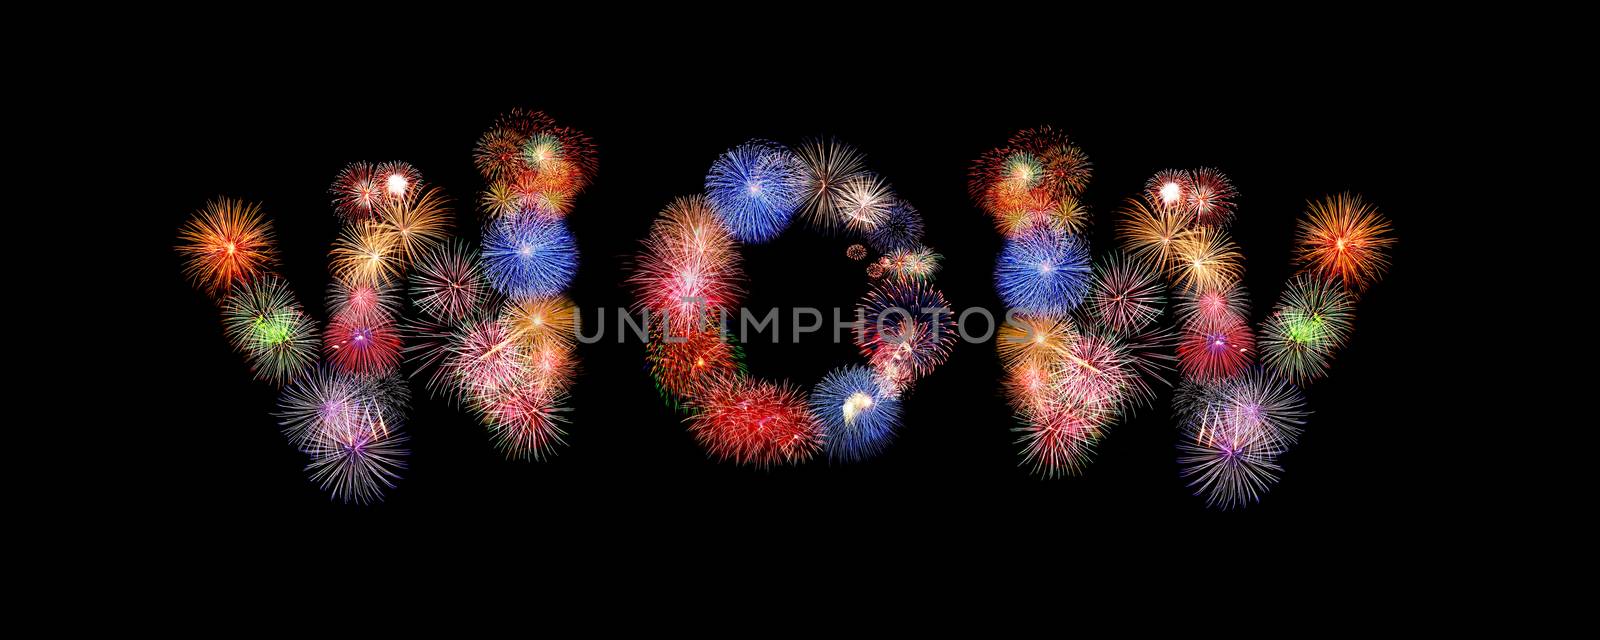 wow word text colorful fireworks by happystock